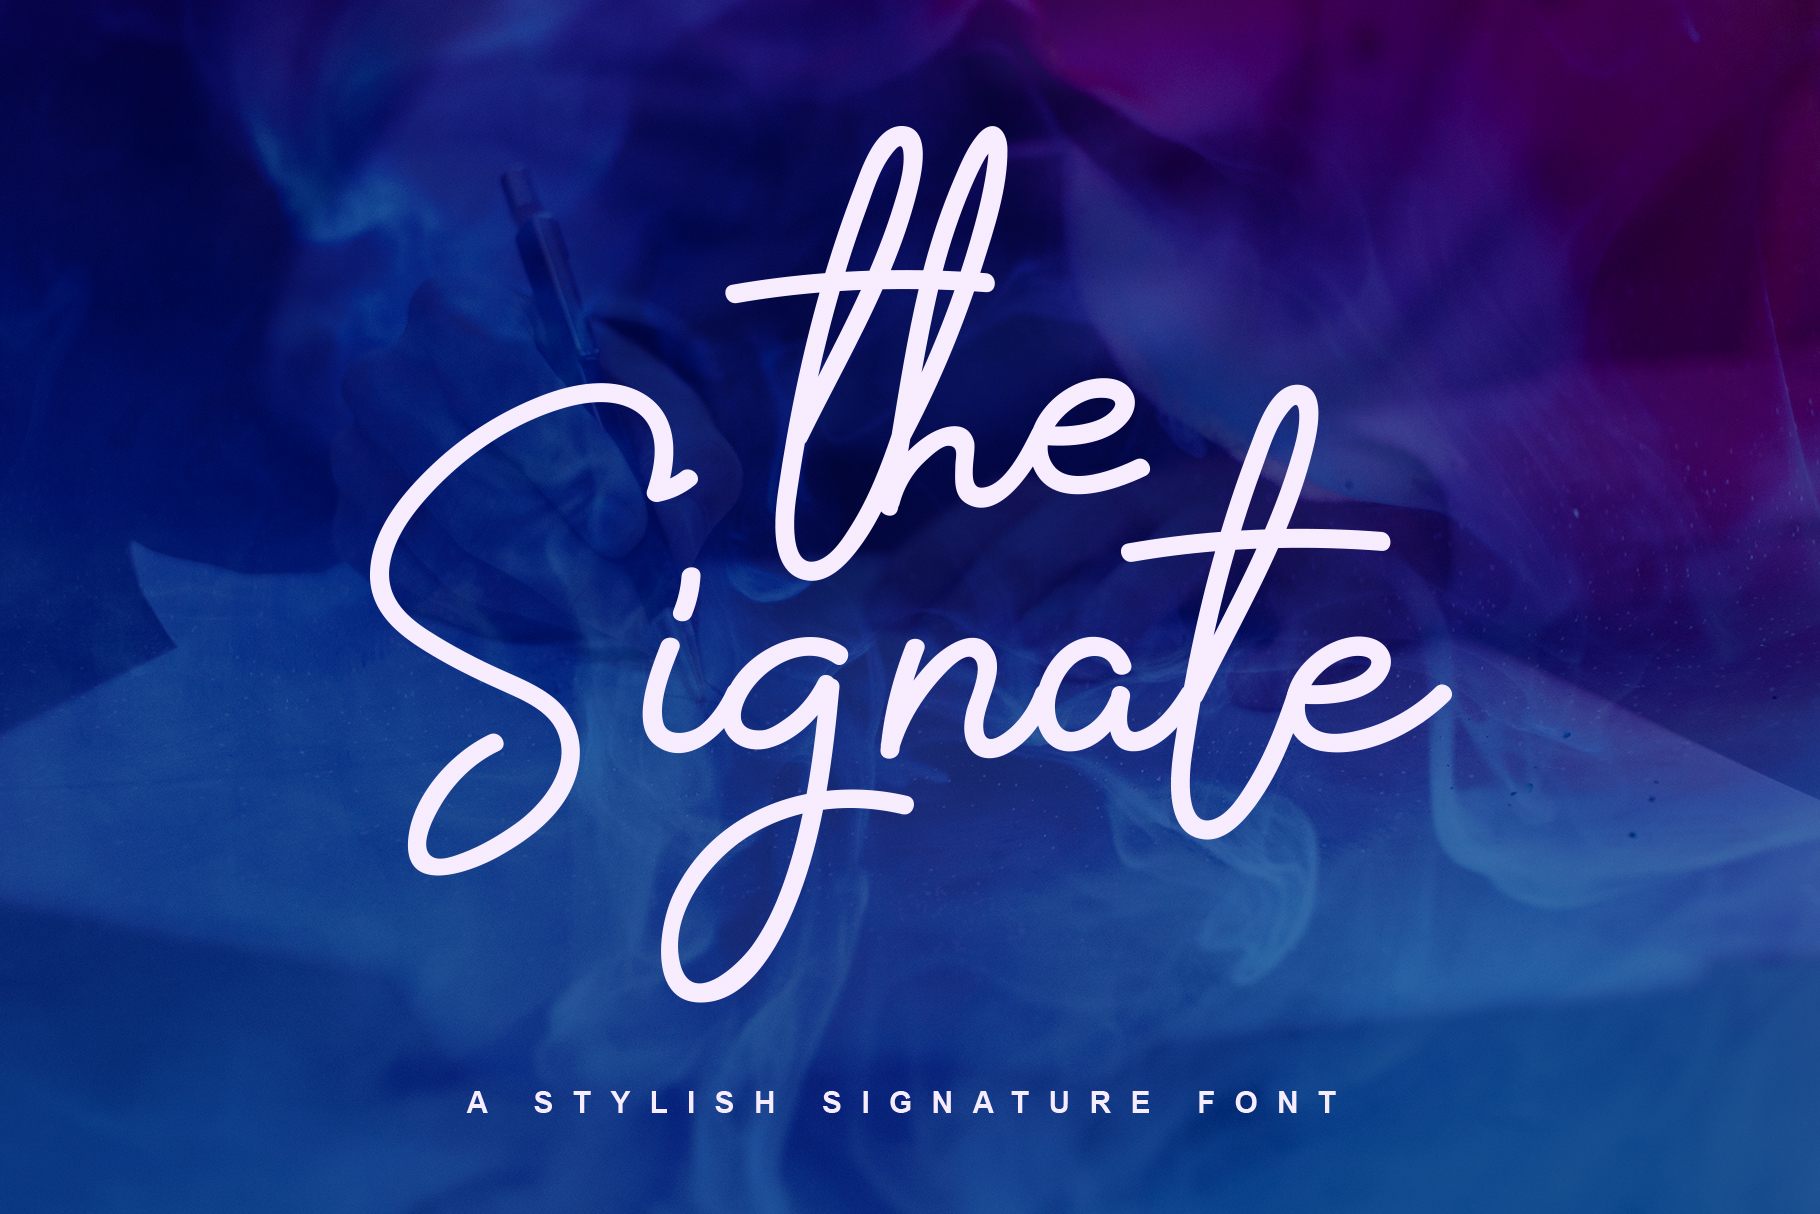 The Signate Free Font